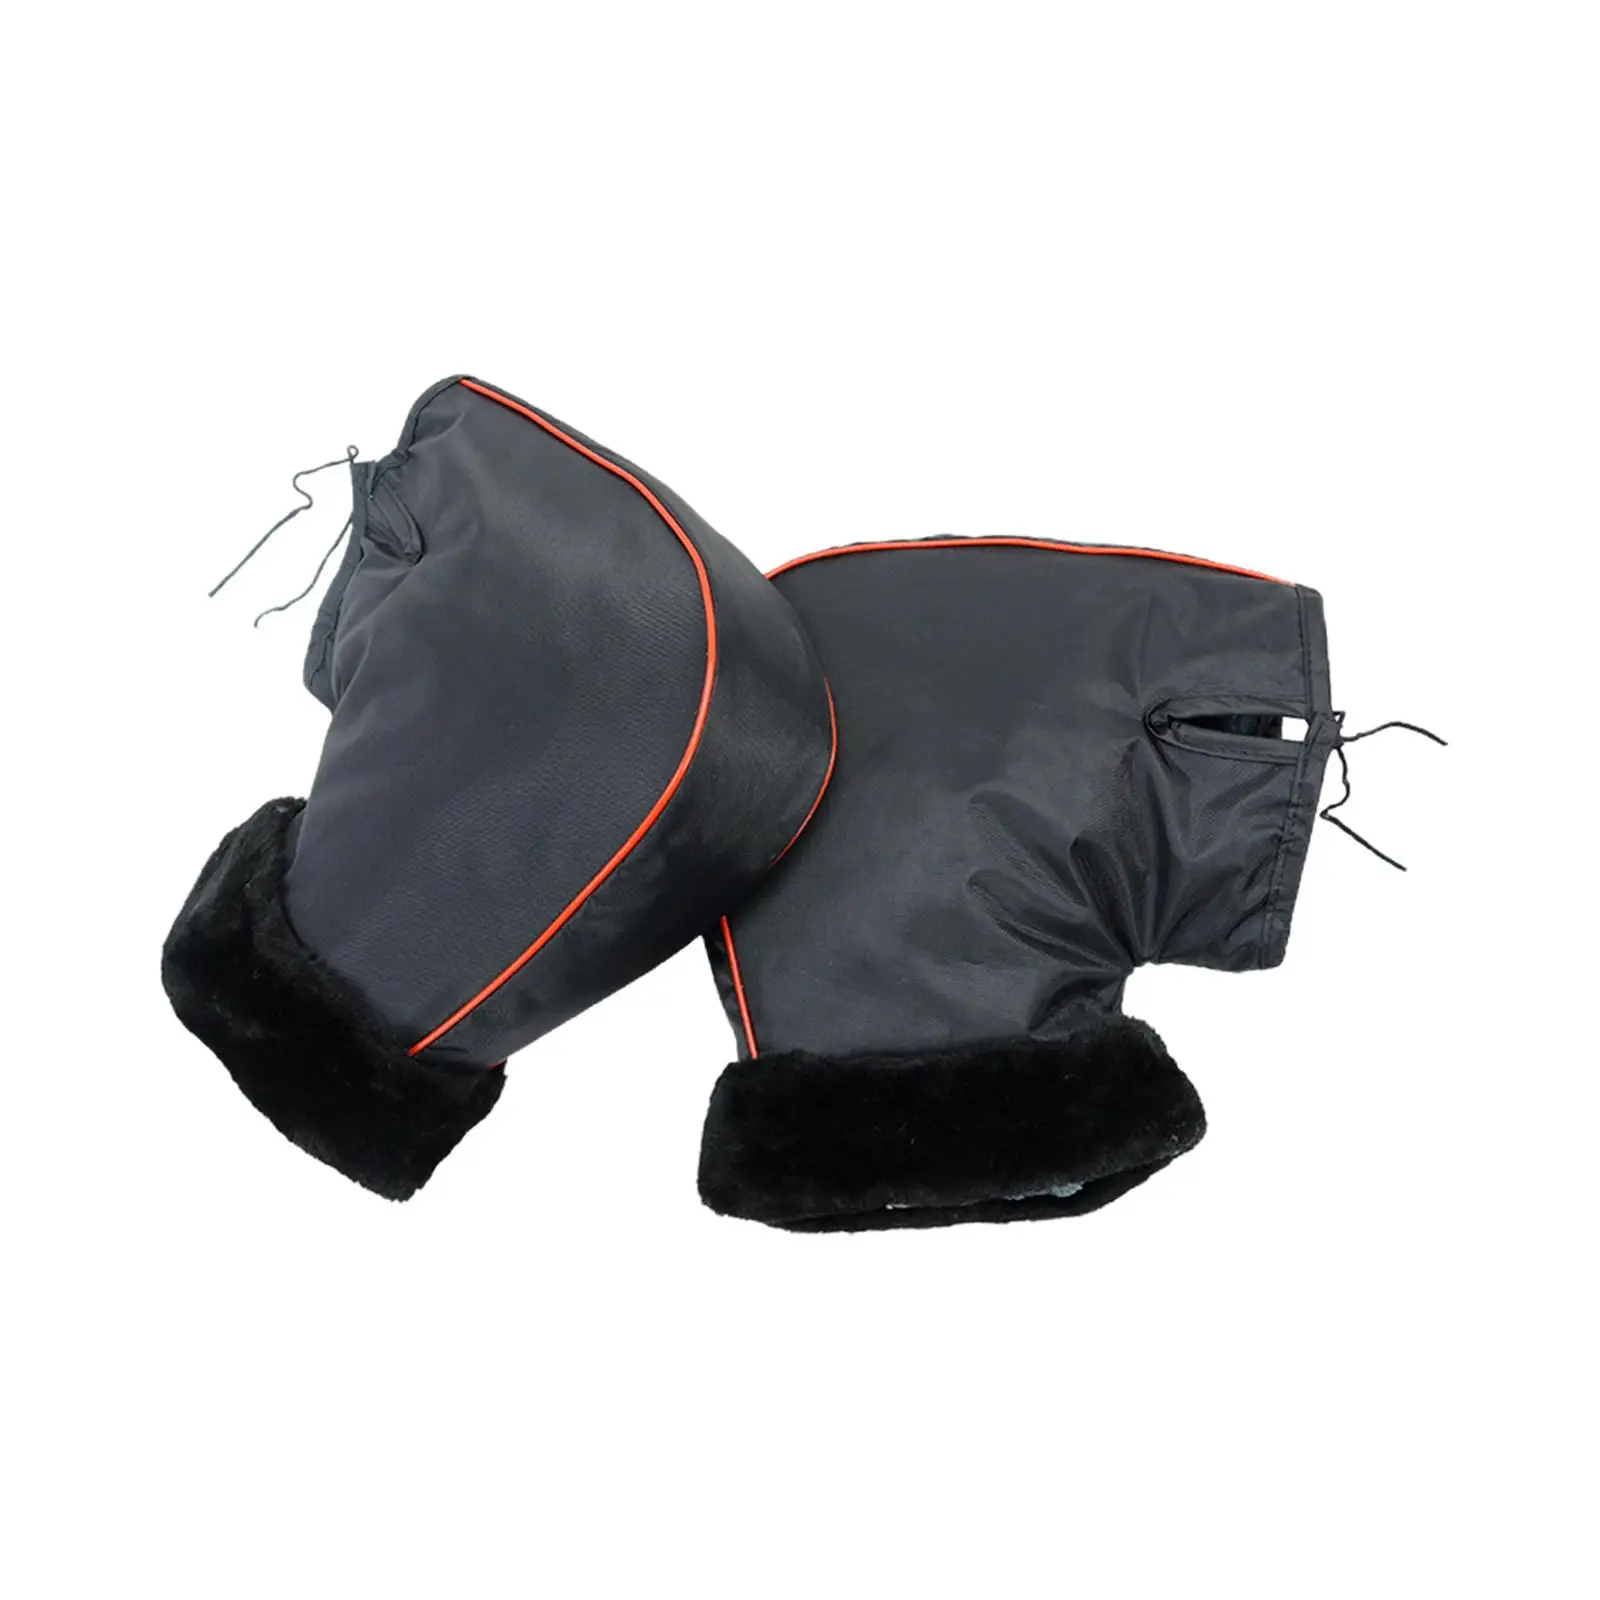 Motorcycle Handlebar Muffs, Keep Hands Warm Hands Protector Mittens Covers for Snowmobile